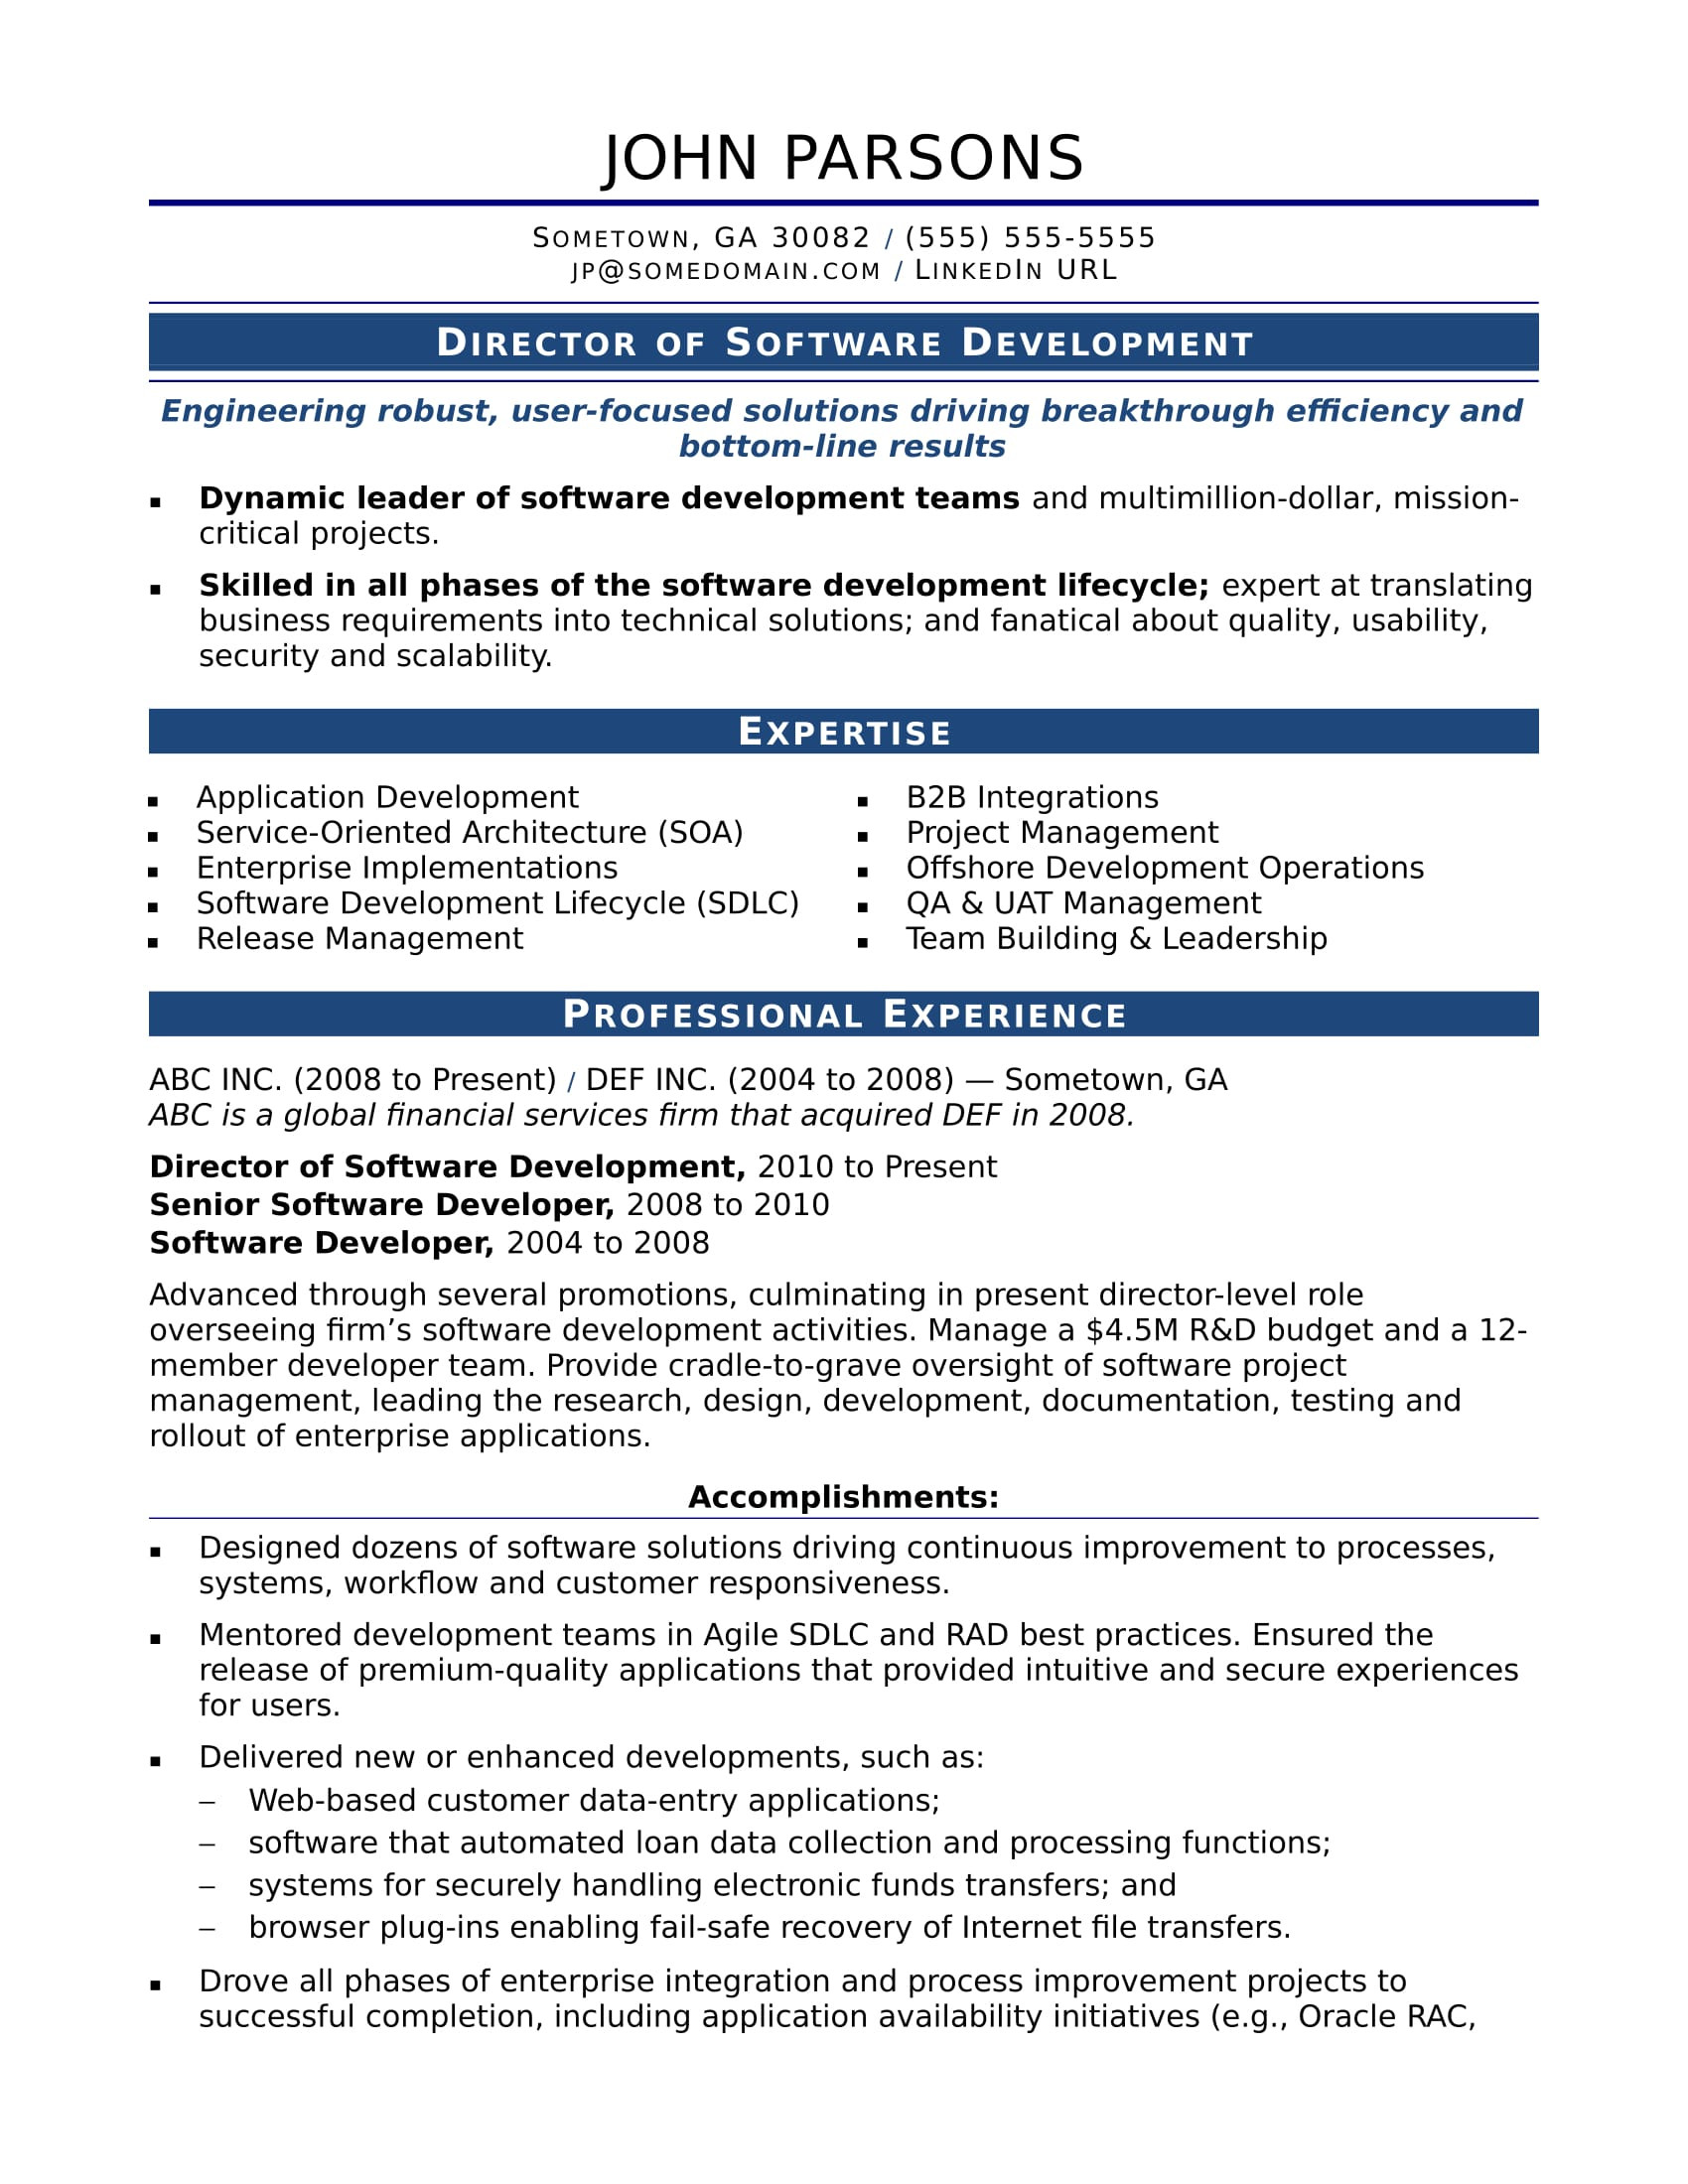 Sample Resume with Onsite Work Experience Sample Resume for An Experienced It Developer Monster.com